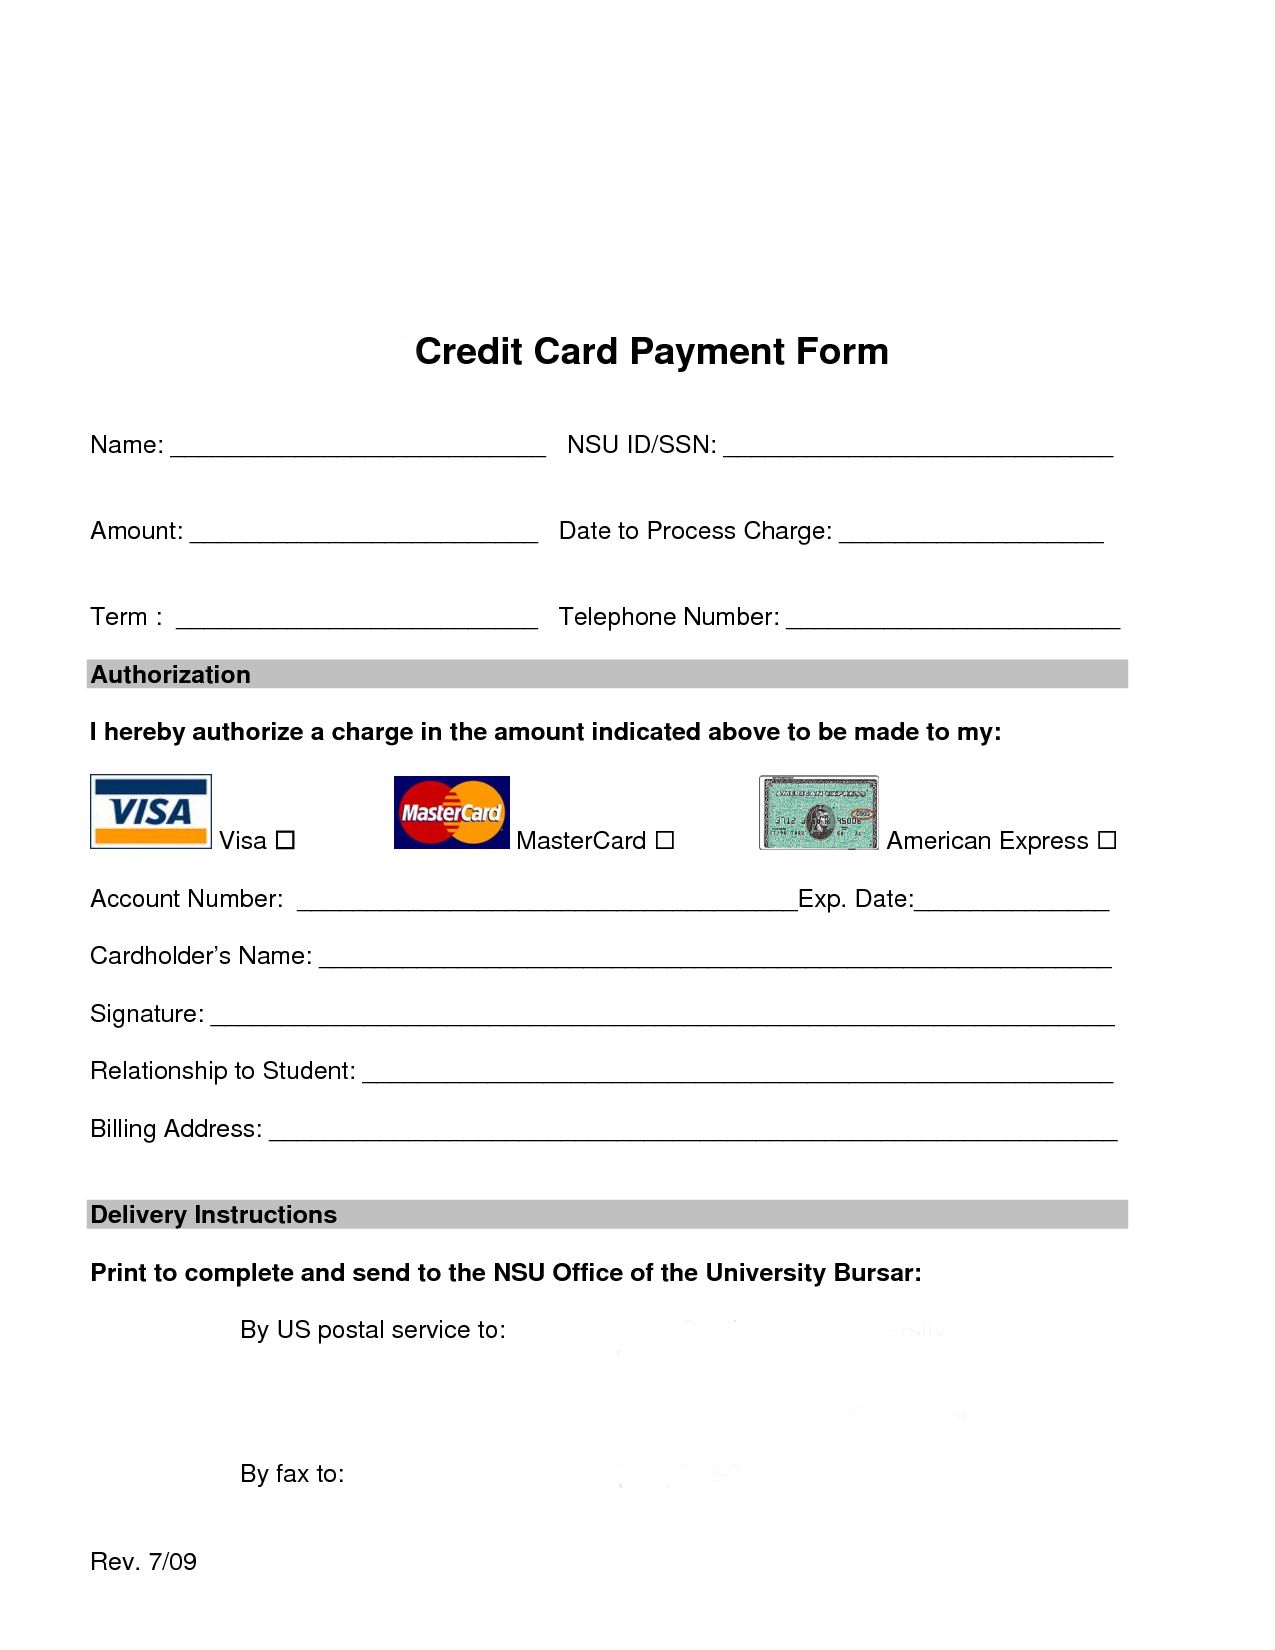 Credit Card Authorization Form | Card Not Present, CenPOS, credit 